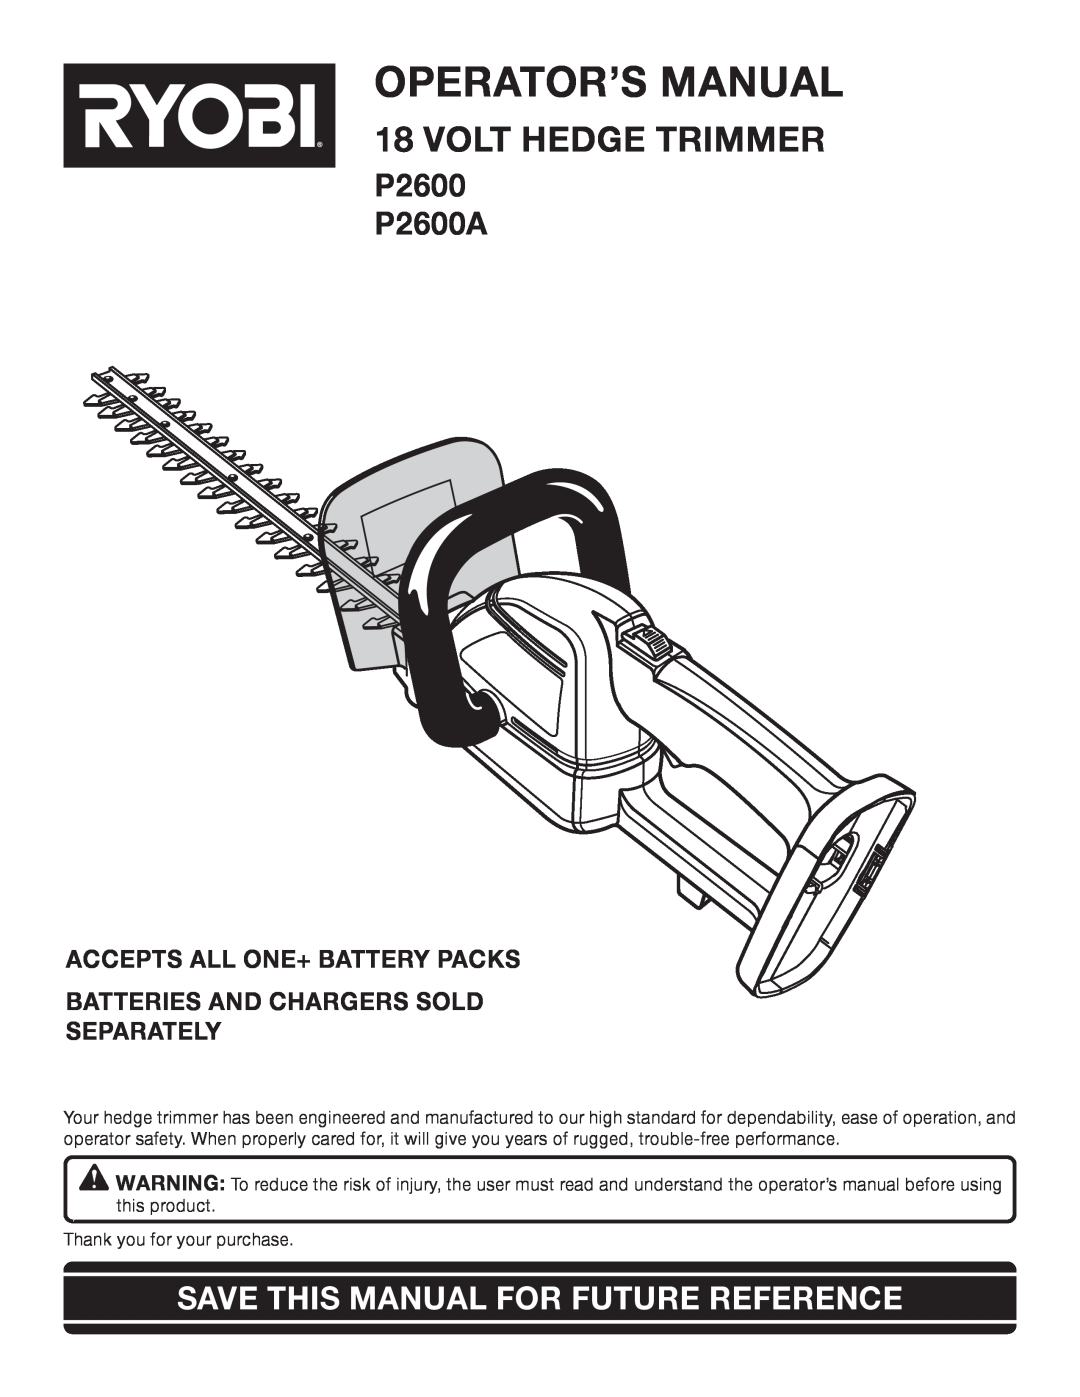 Ryobi manual Operator’S Manual, volt HEDGE TRIMMER, p2600 P2600A, Save This Manual For Future Reference 